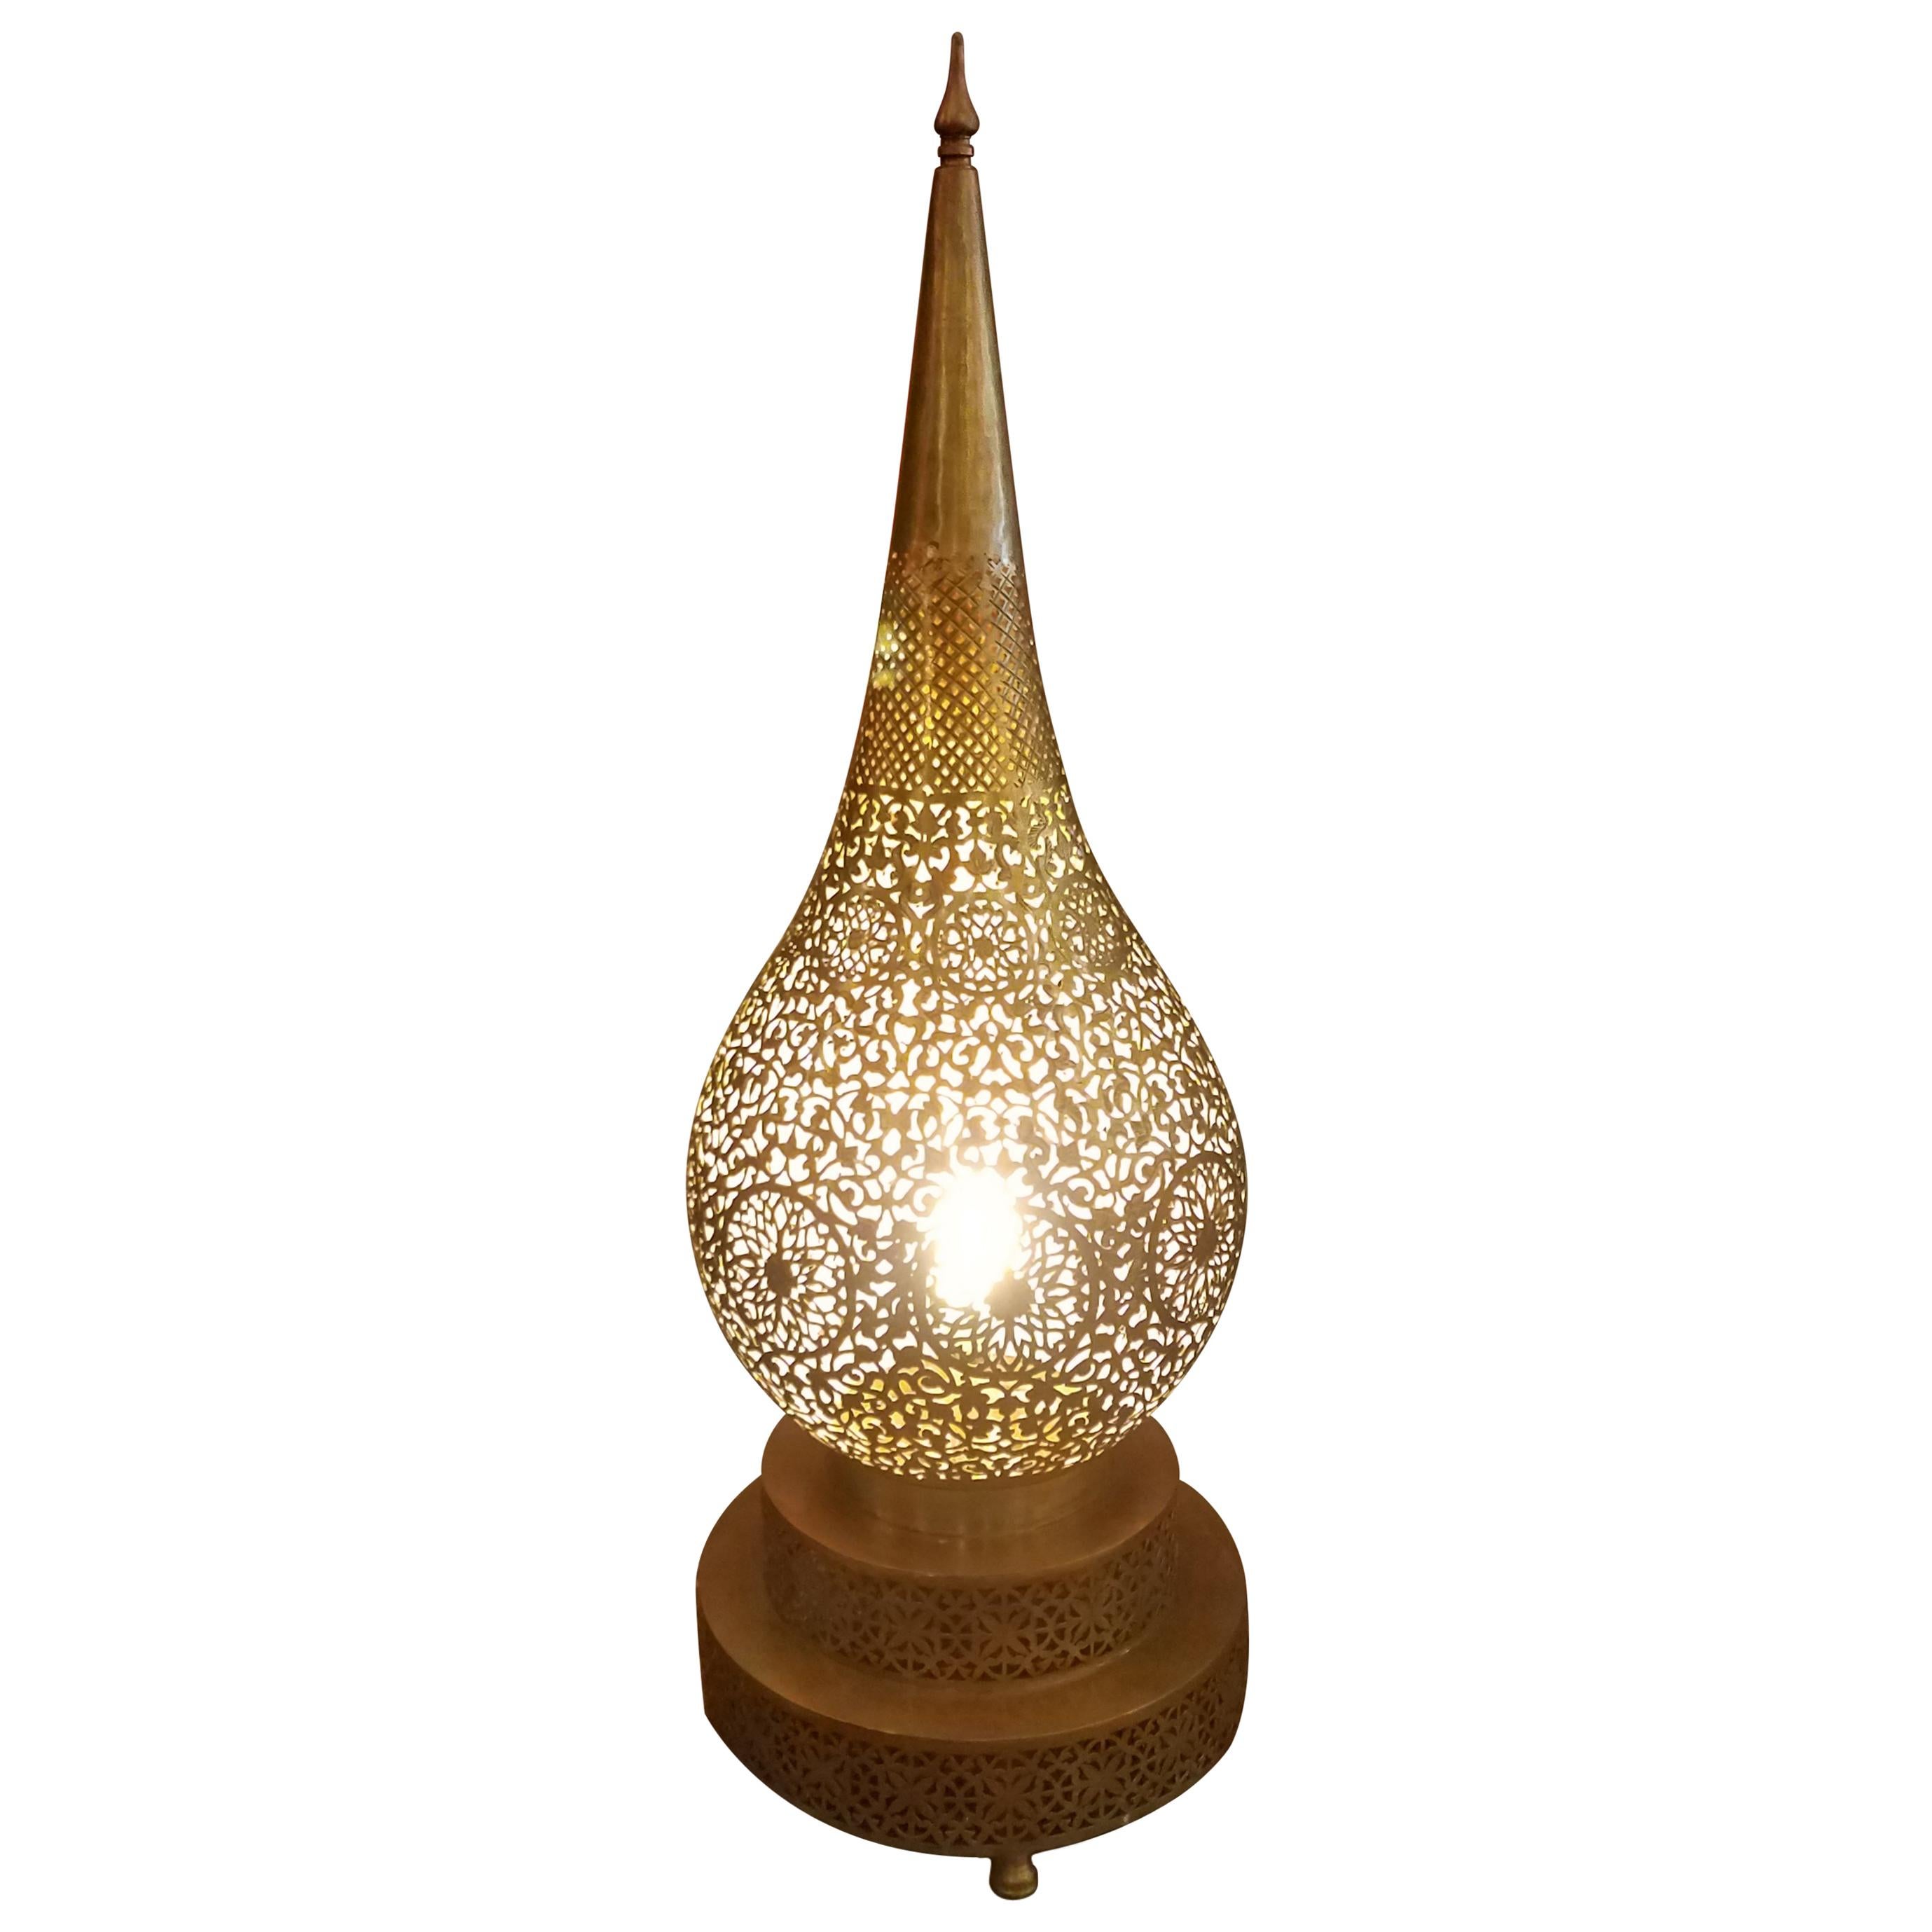 Tall Intricate Moroccan Copper Lamp or Lantern, Table Lamp For Sale